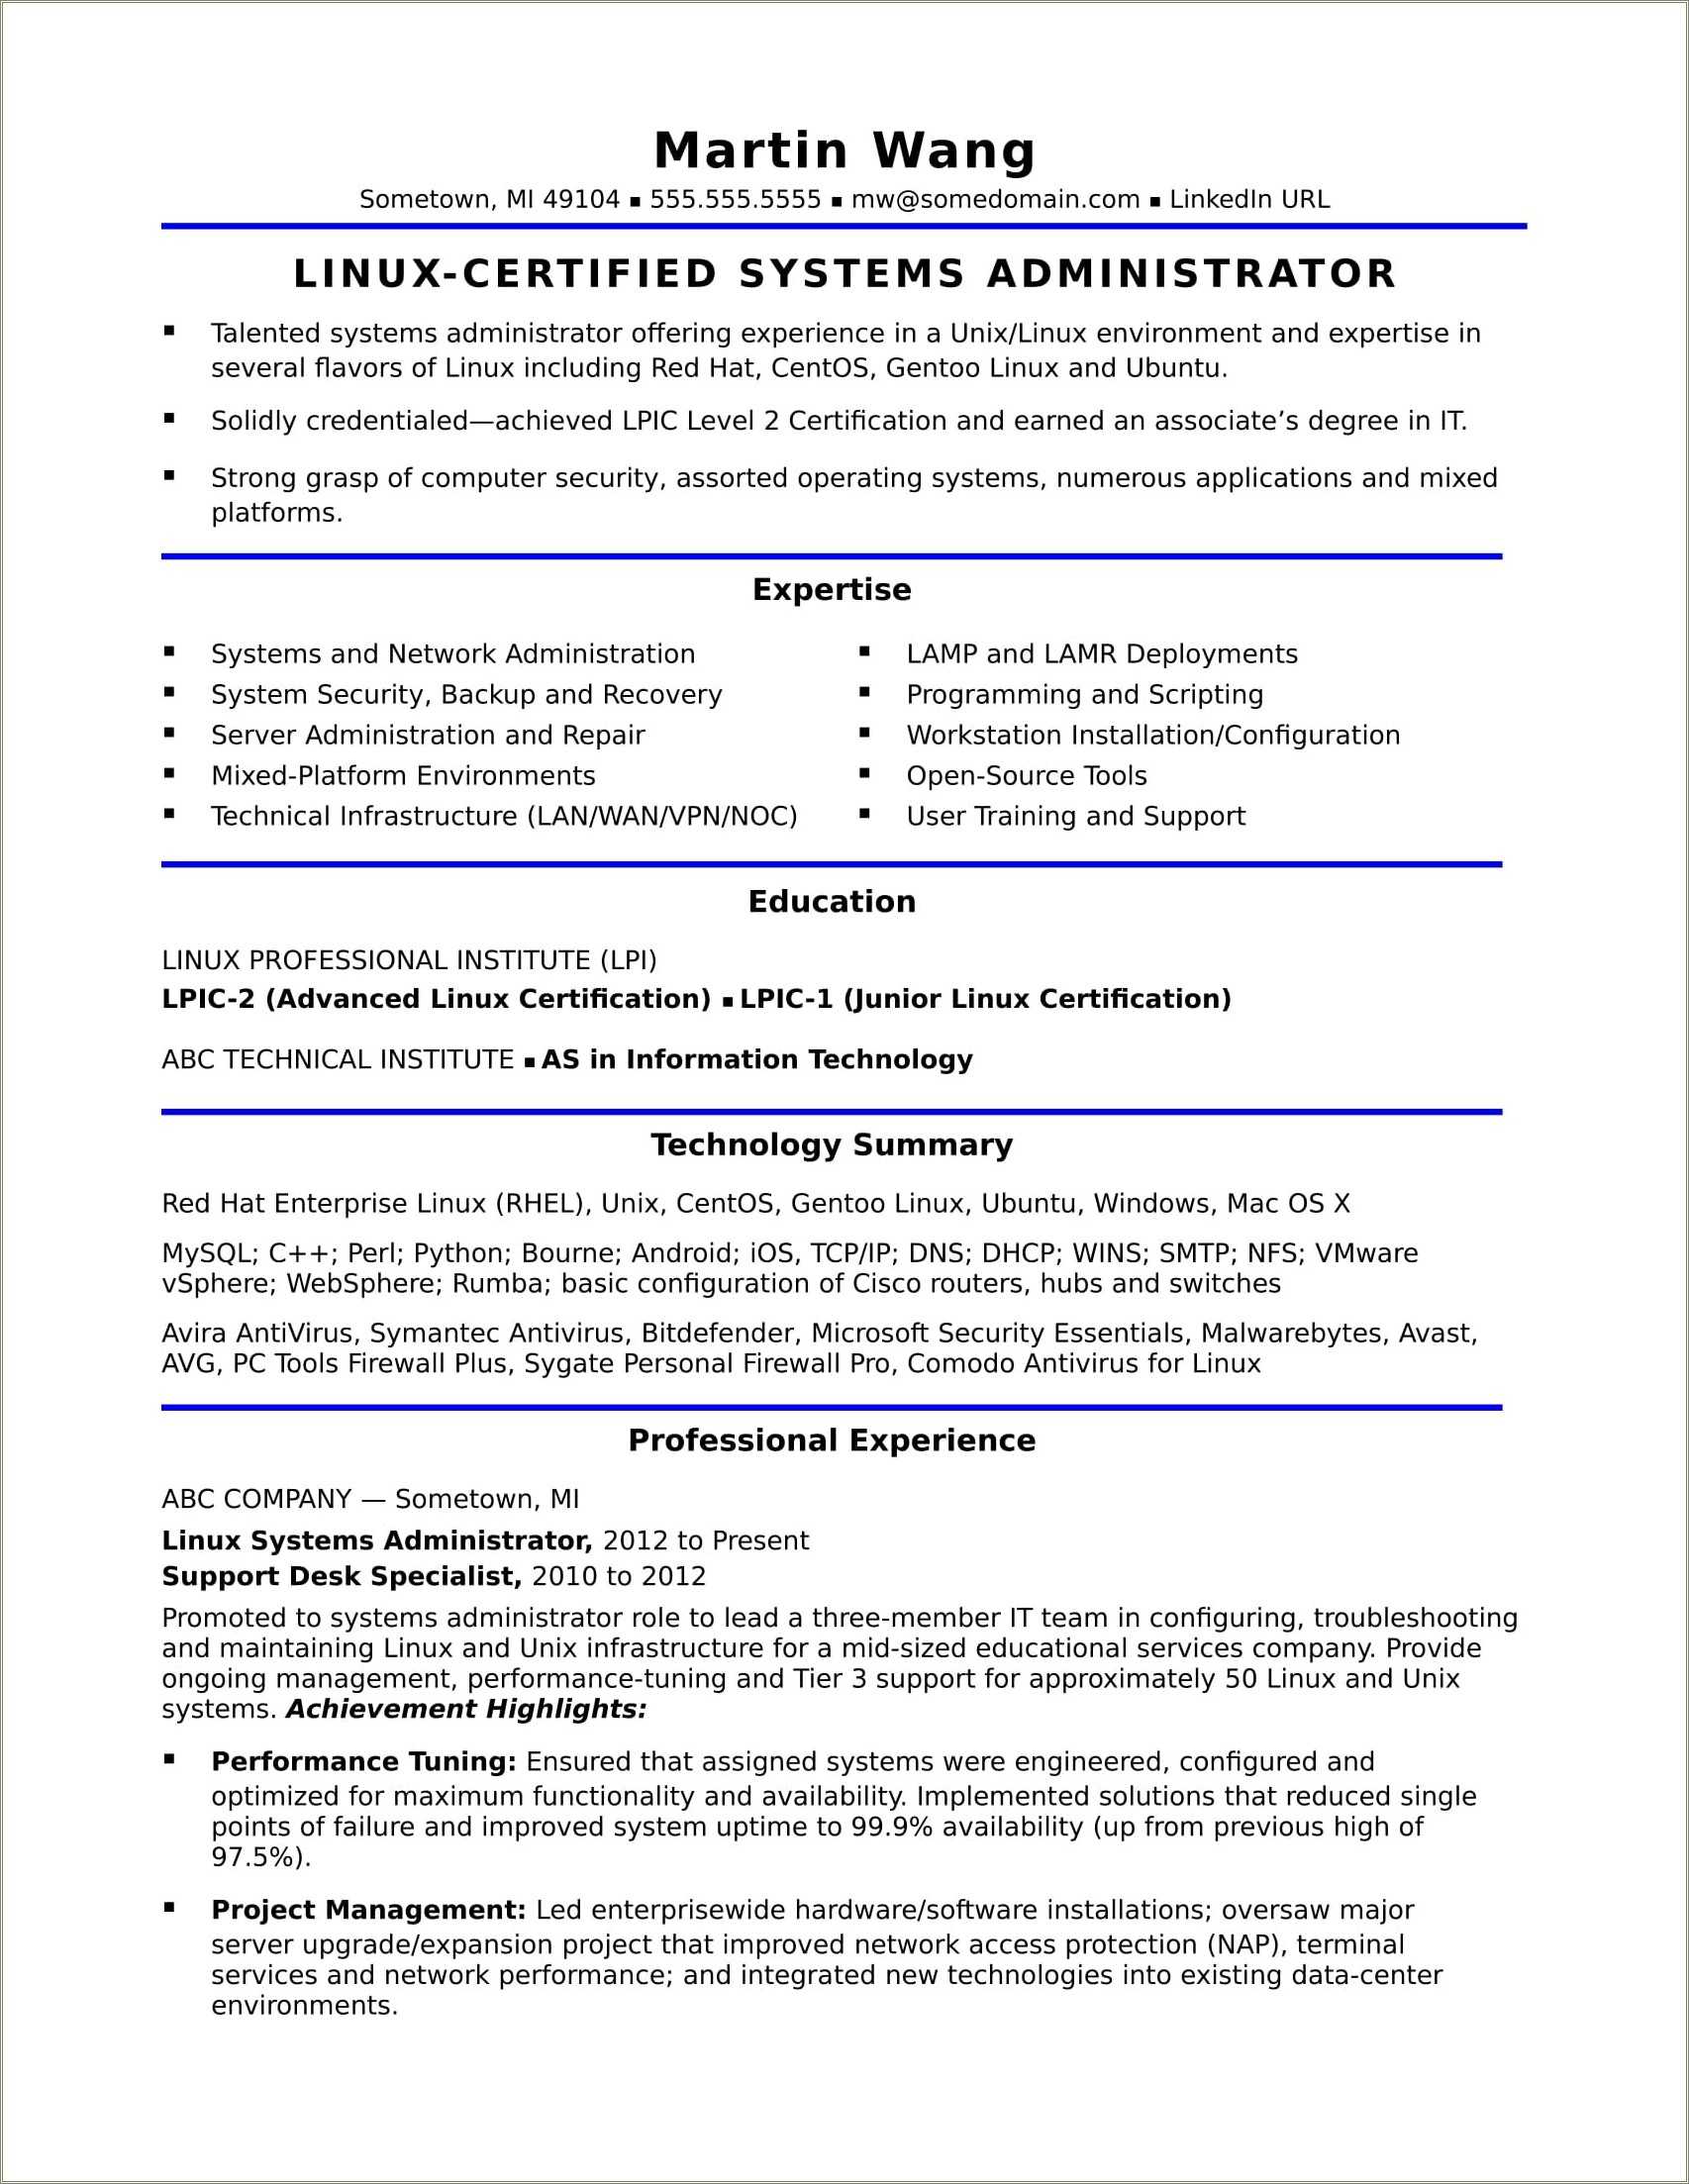 functional entry level resume free template download